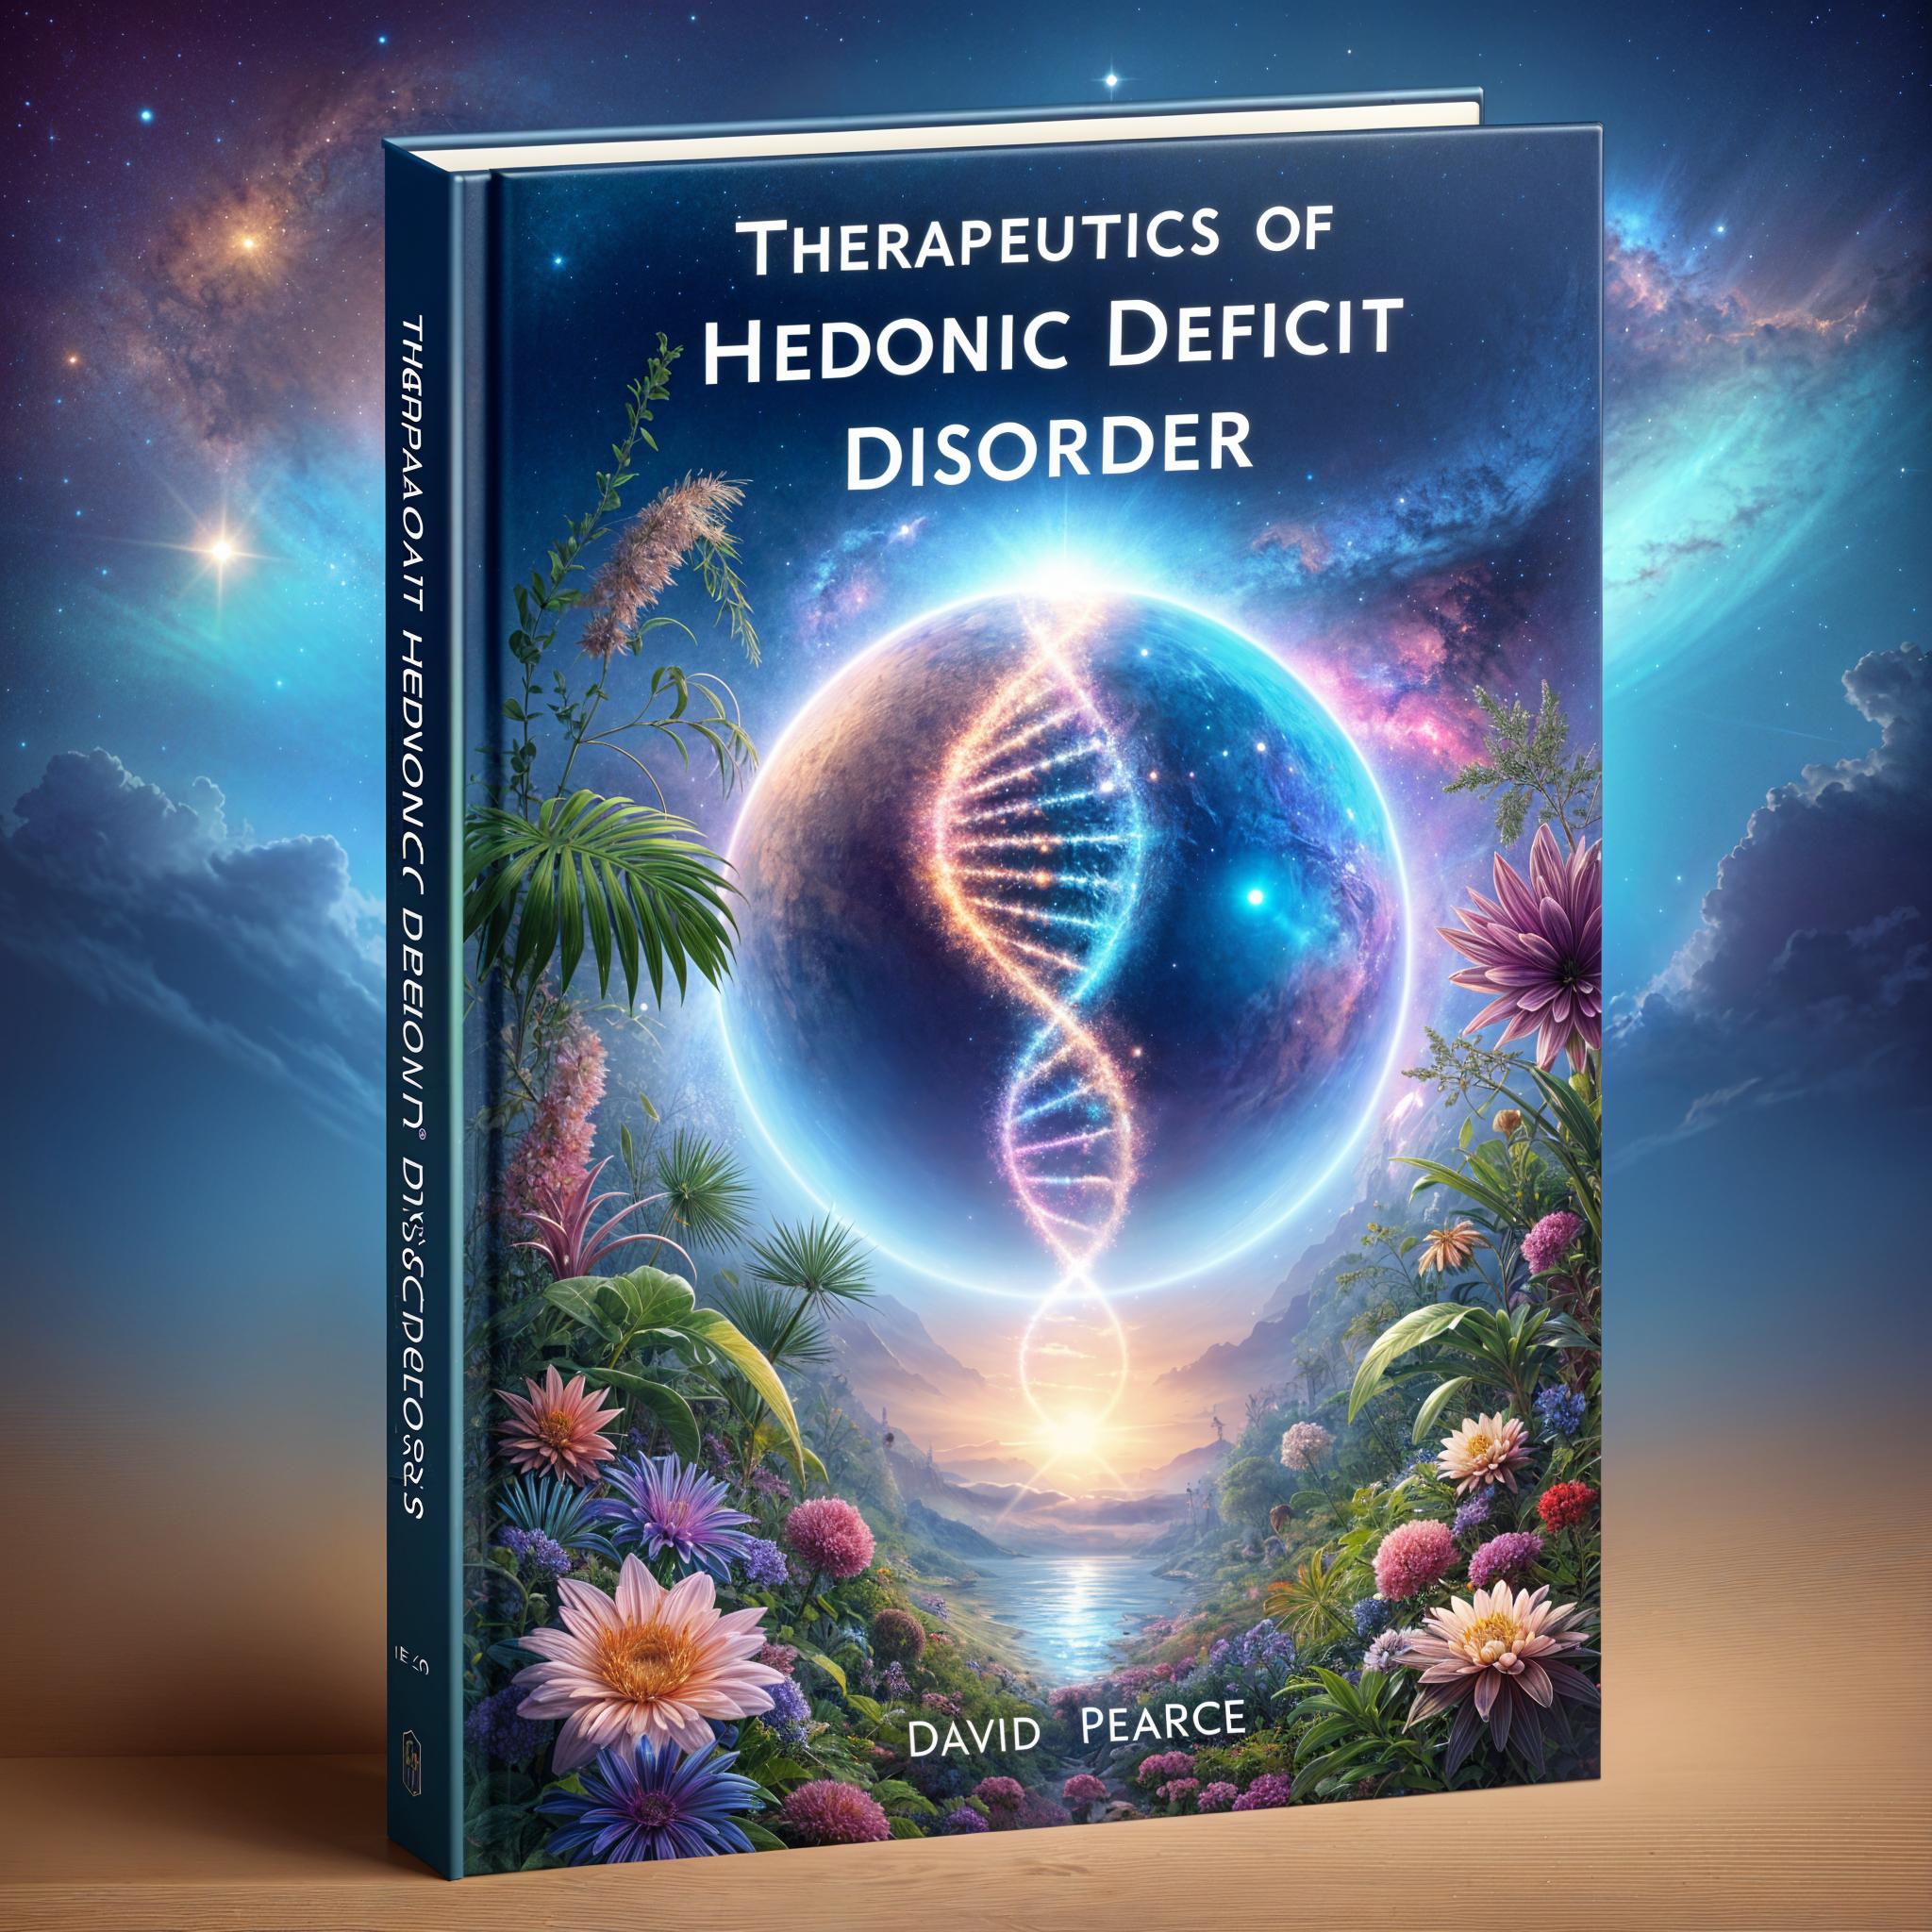 Therapeutics of Hedonic Deficit Disorders by David Pearce